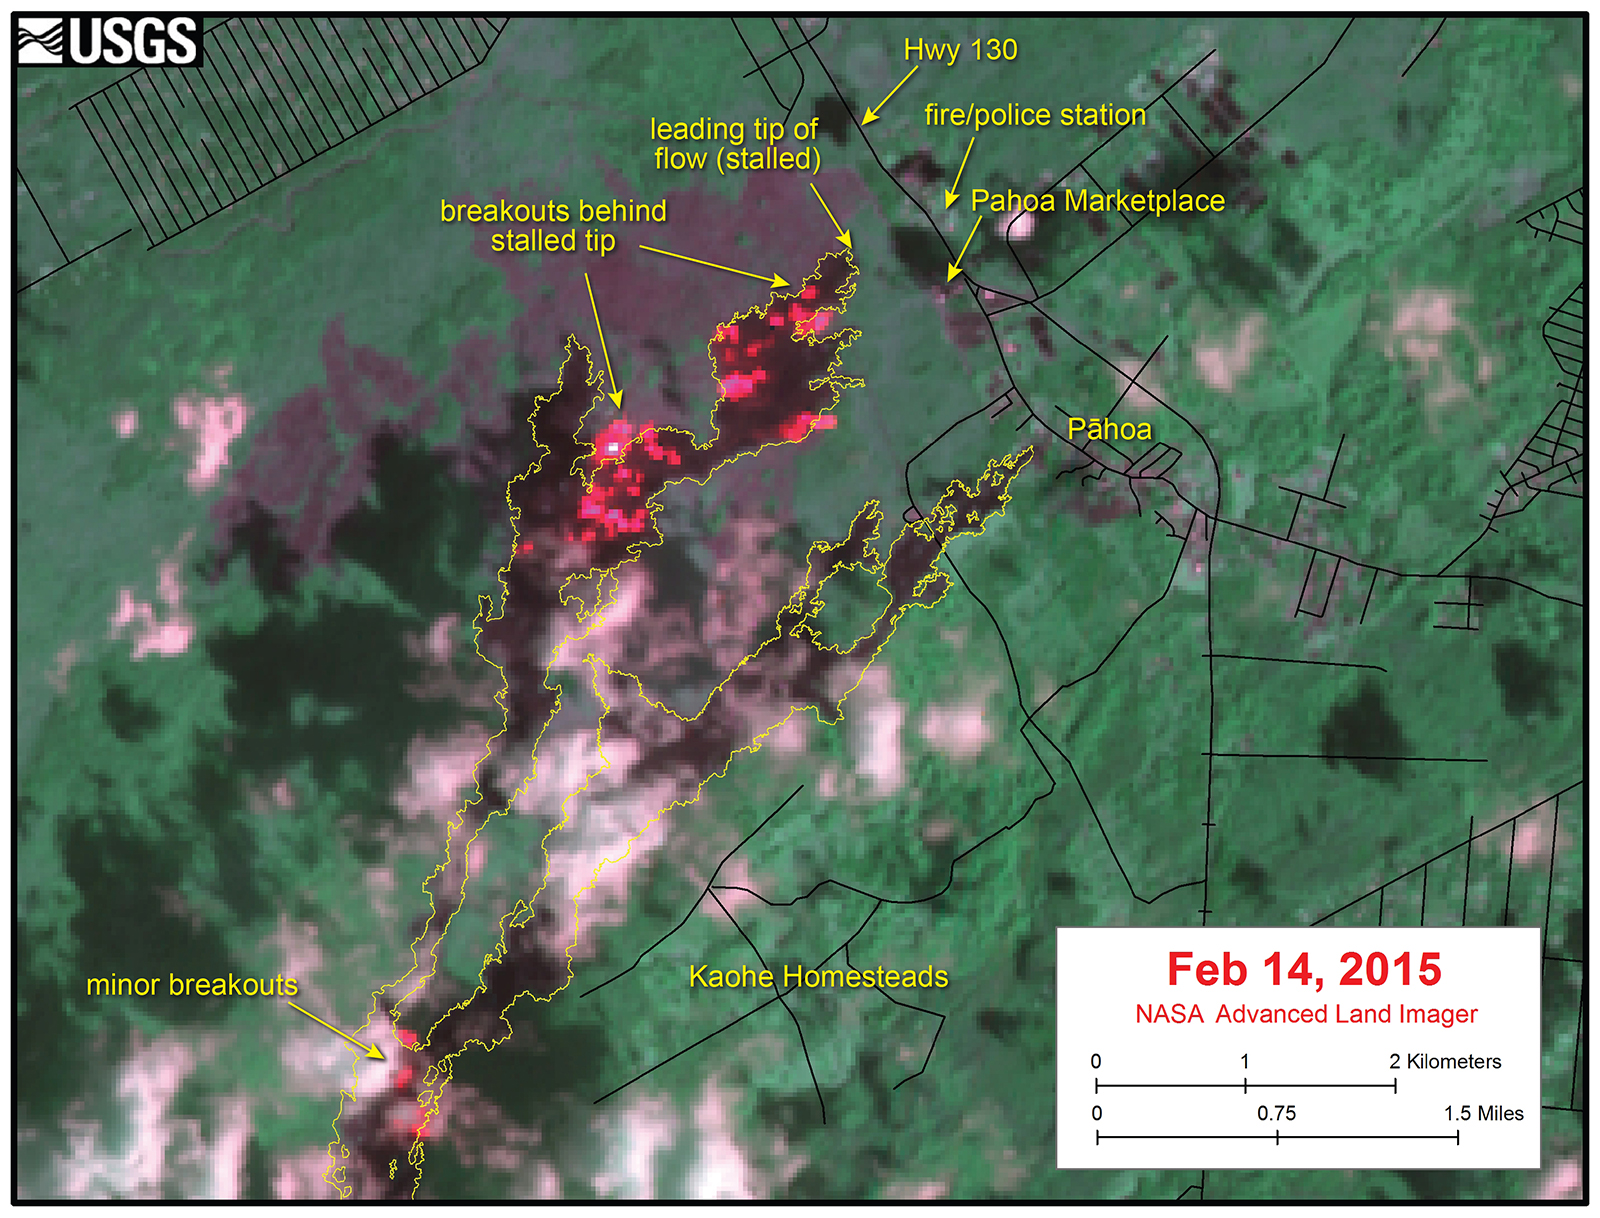 Advanced Land Imager true-color image (bands 10-8-9) over the distal portion of the June 27, 2014, lava flow on February 14, 2015, when the flow front threatened to cross the main highway and inundate a fire/police station. Red pixels show high temperatures (i.e., high values in the 2-micron band 10 channel) indicative of active lava breakouts.  Images such as this were useful in identifying the main areas of activity on the lava flow field. The yellow line is the mapped lava flow margin, and black lines are roads. North is oriented toward the top of the image.